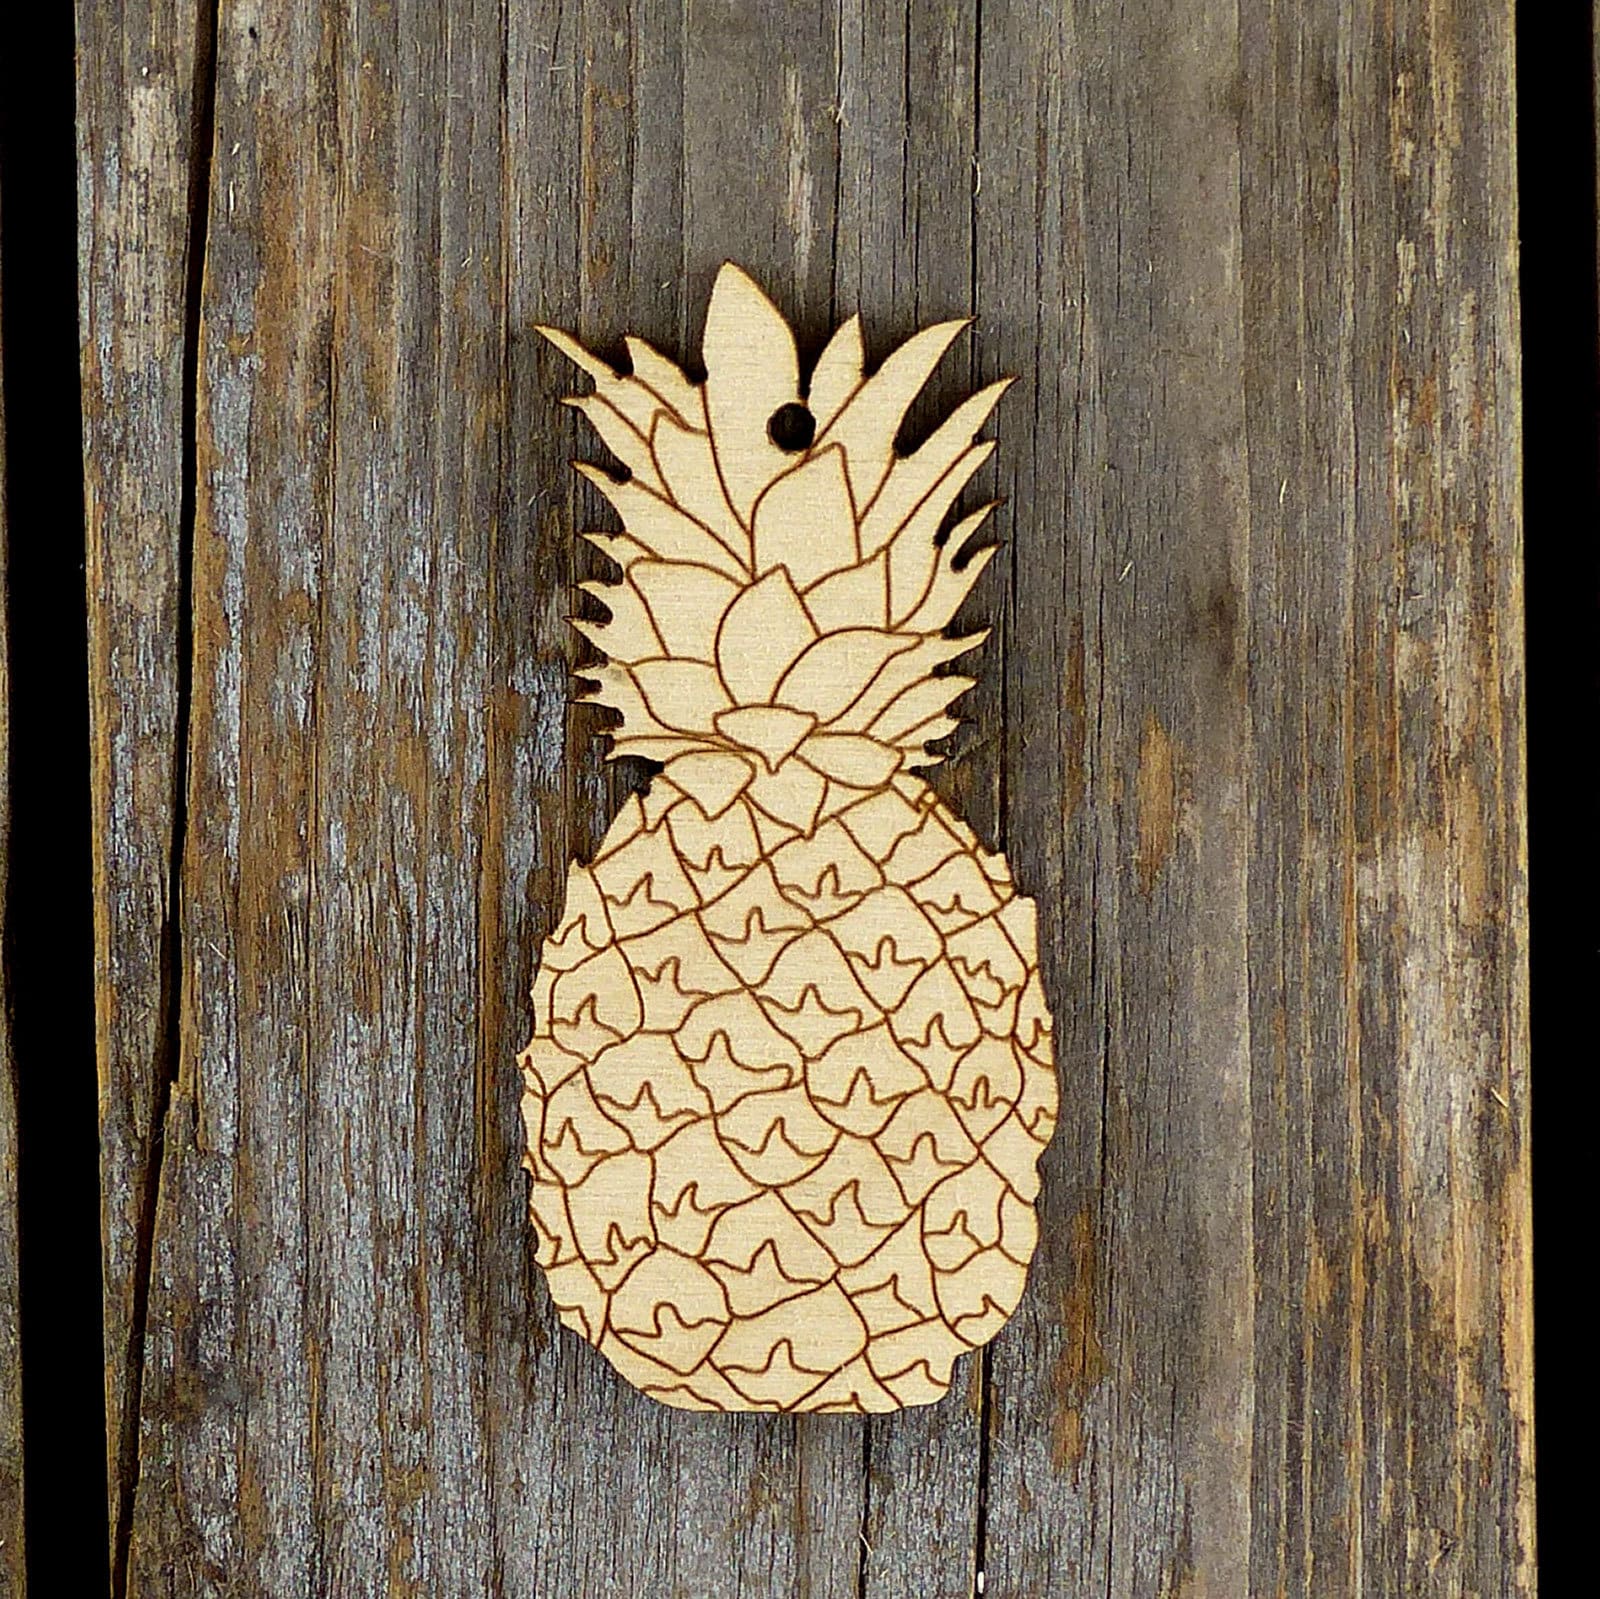 10x Wooden Pineapple Whole Plant Ply Craft Food Shape Vine 3mm Fruit - Etsy Tropical Singapore